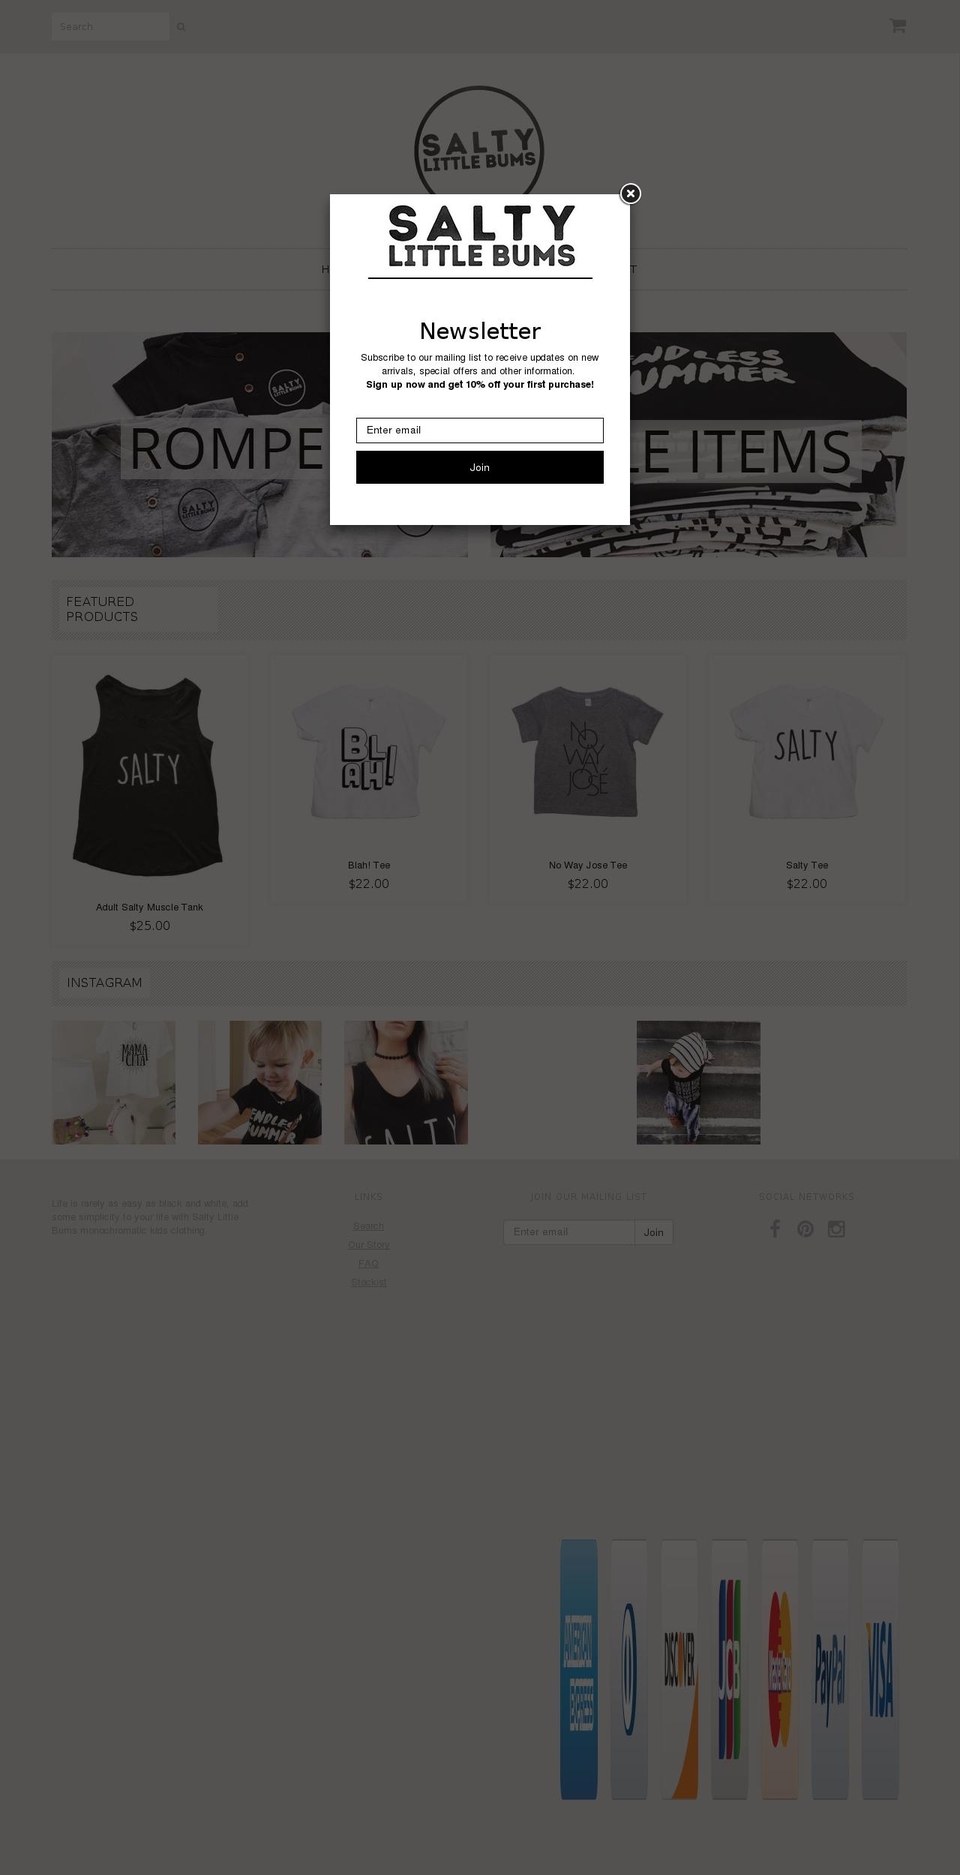 Spark Shopify theme site example saltylittlebums.com